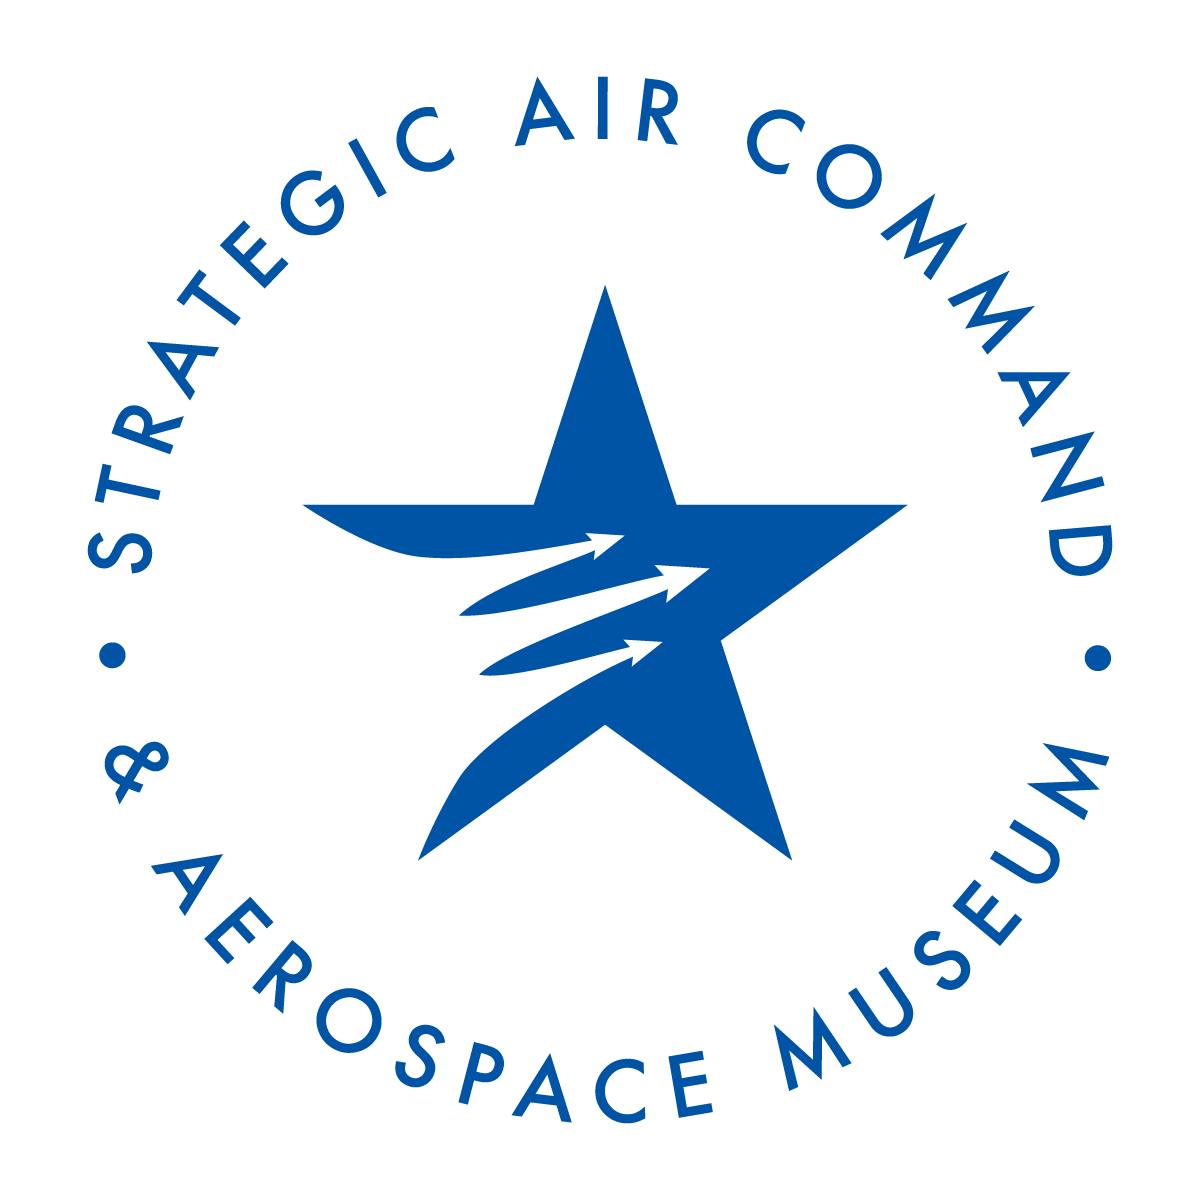 A blue star with planes through it and "Strategic Air Command & Aerospace Museum" written around the outside.